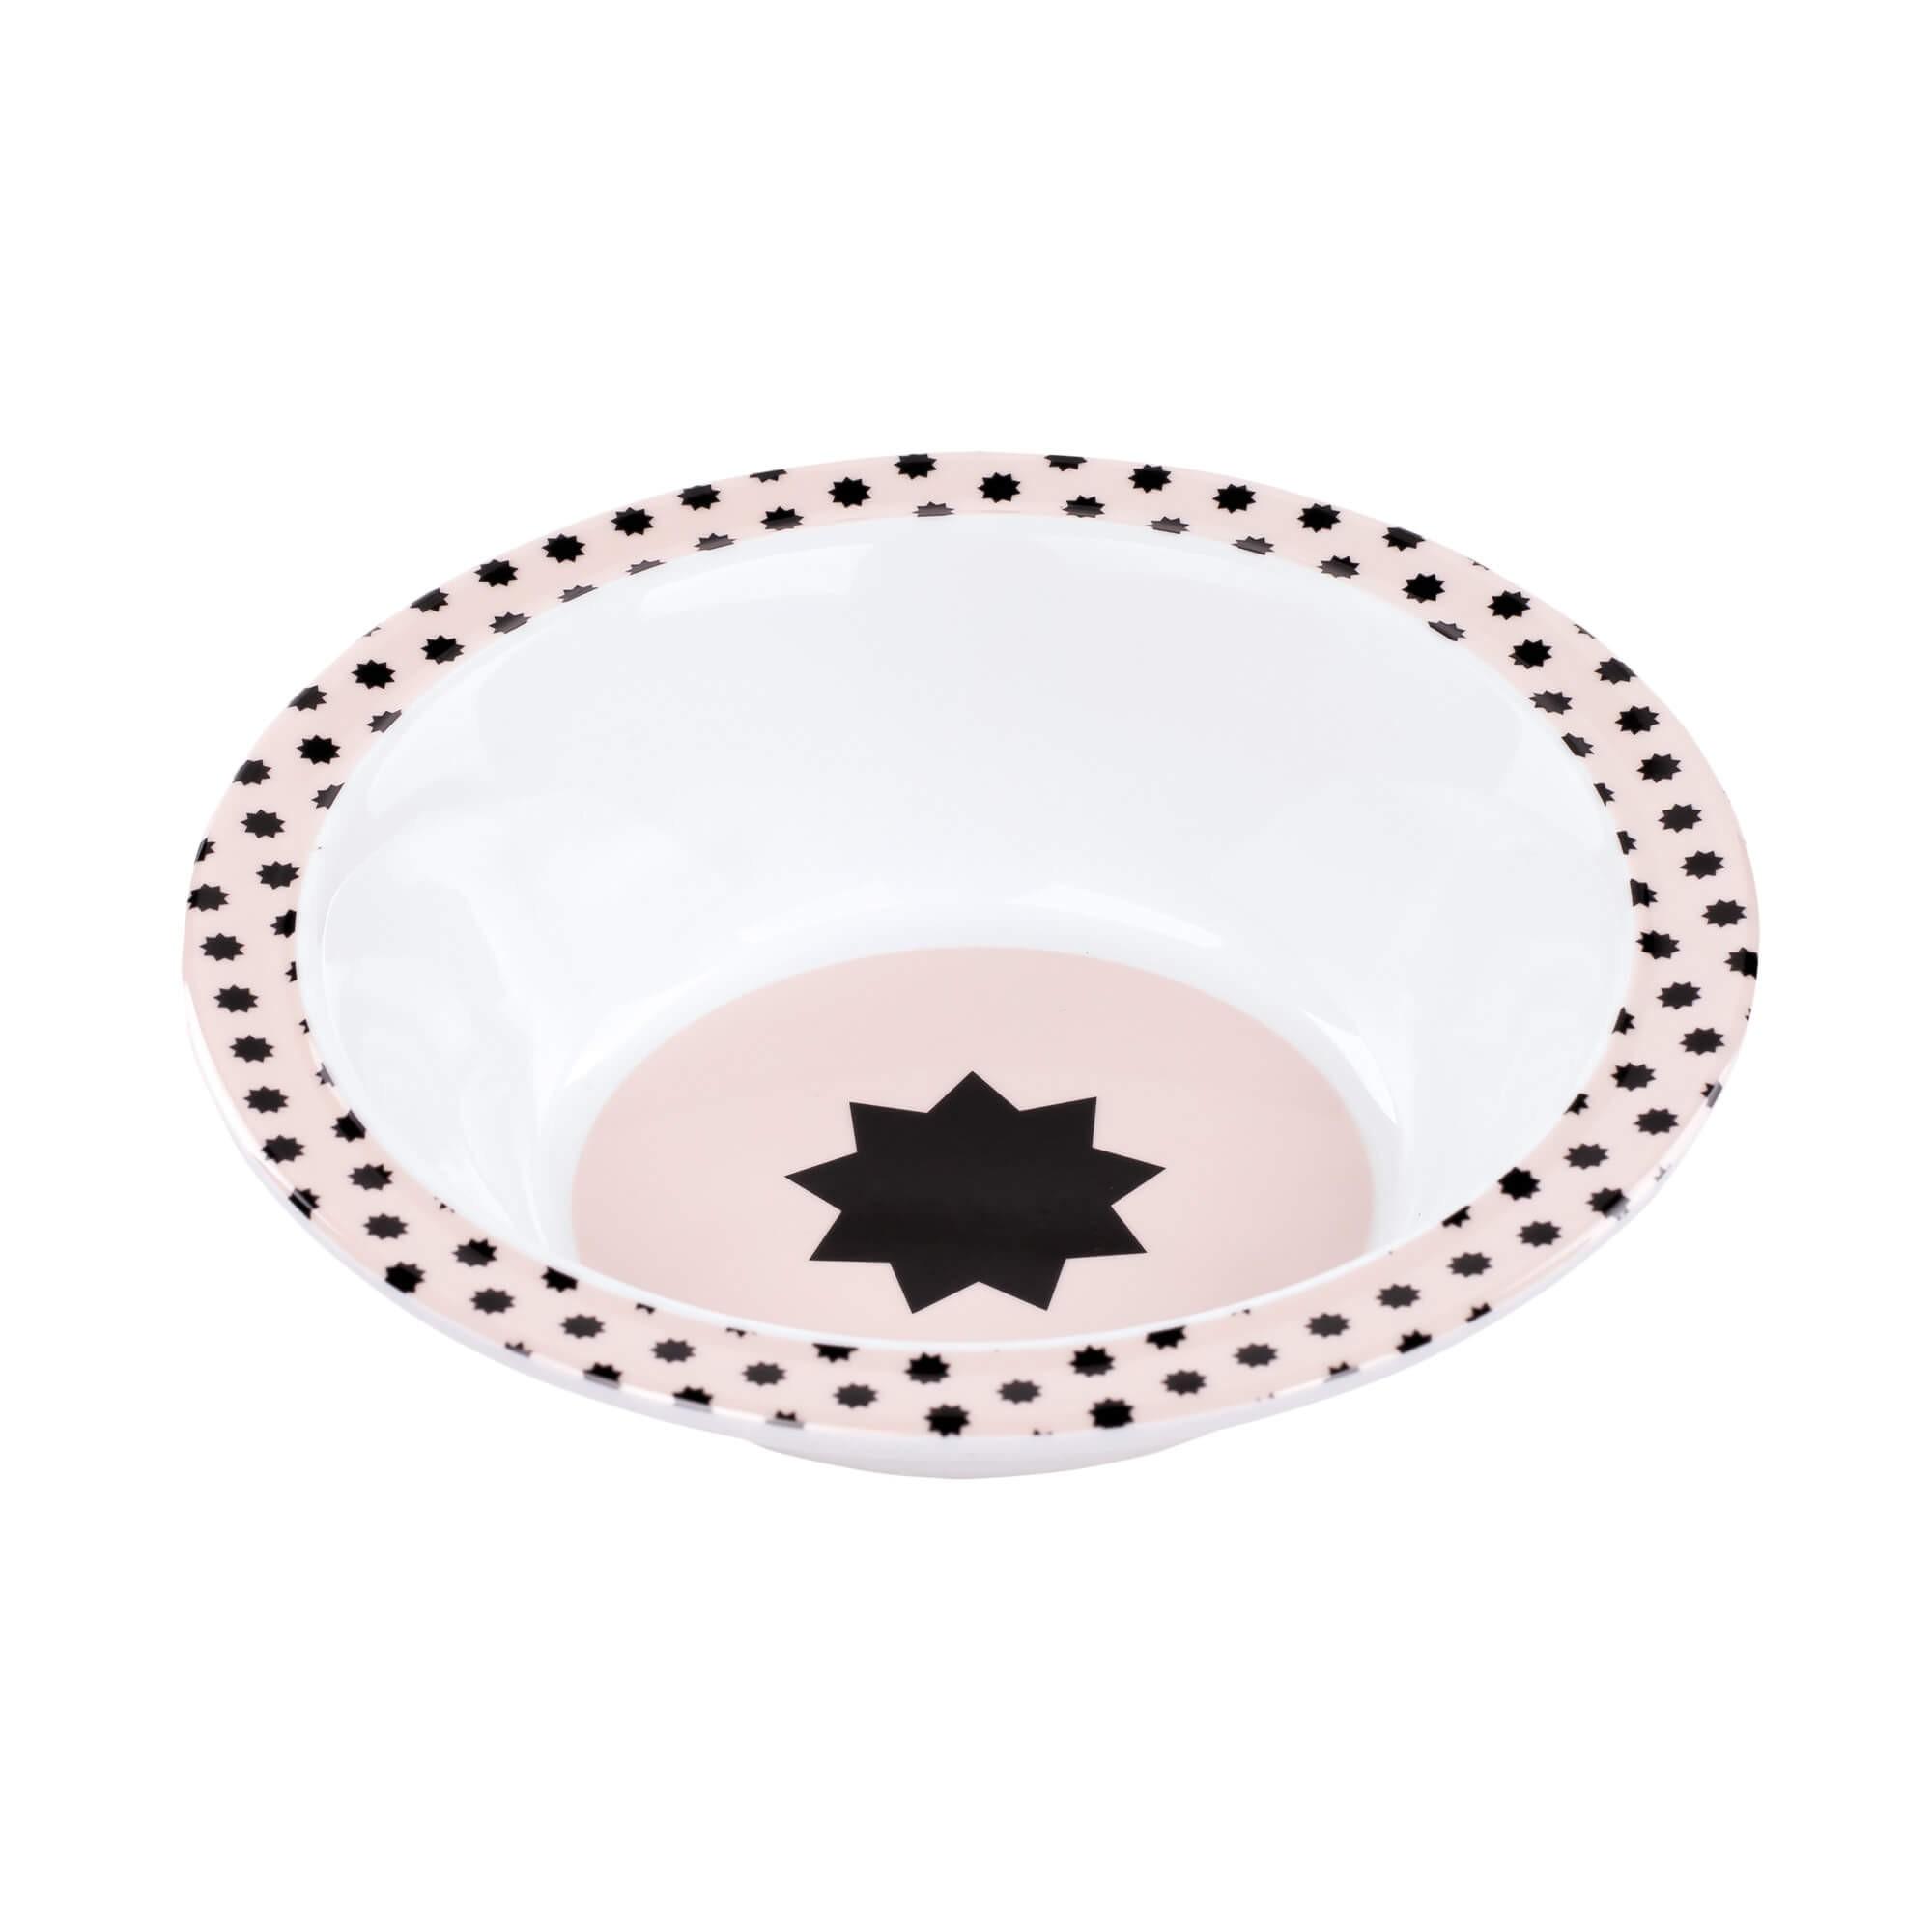 Lassig - Bowl Melamine/Silicone Little Chums Mouse